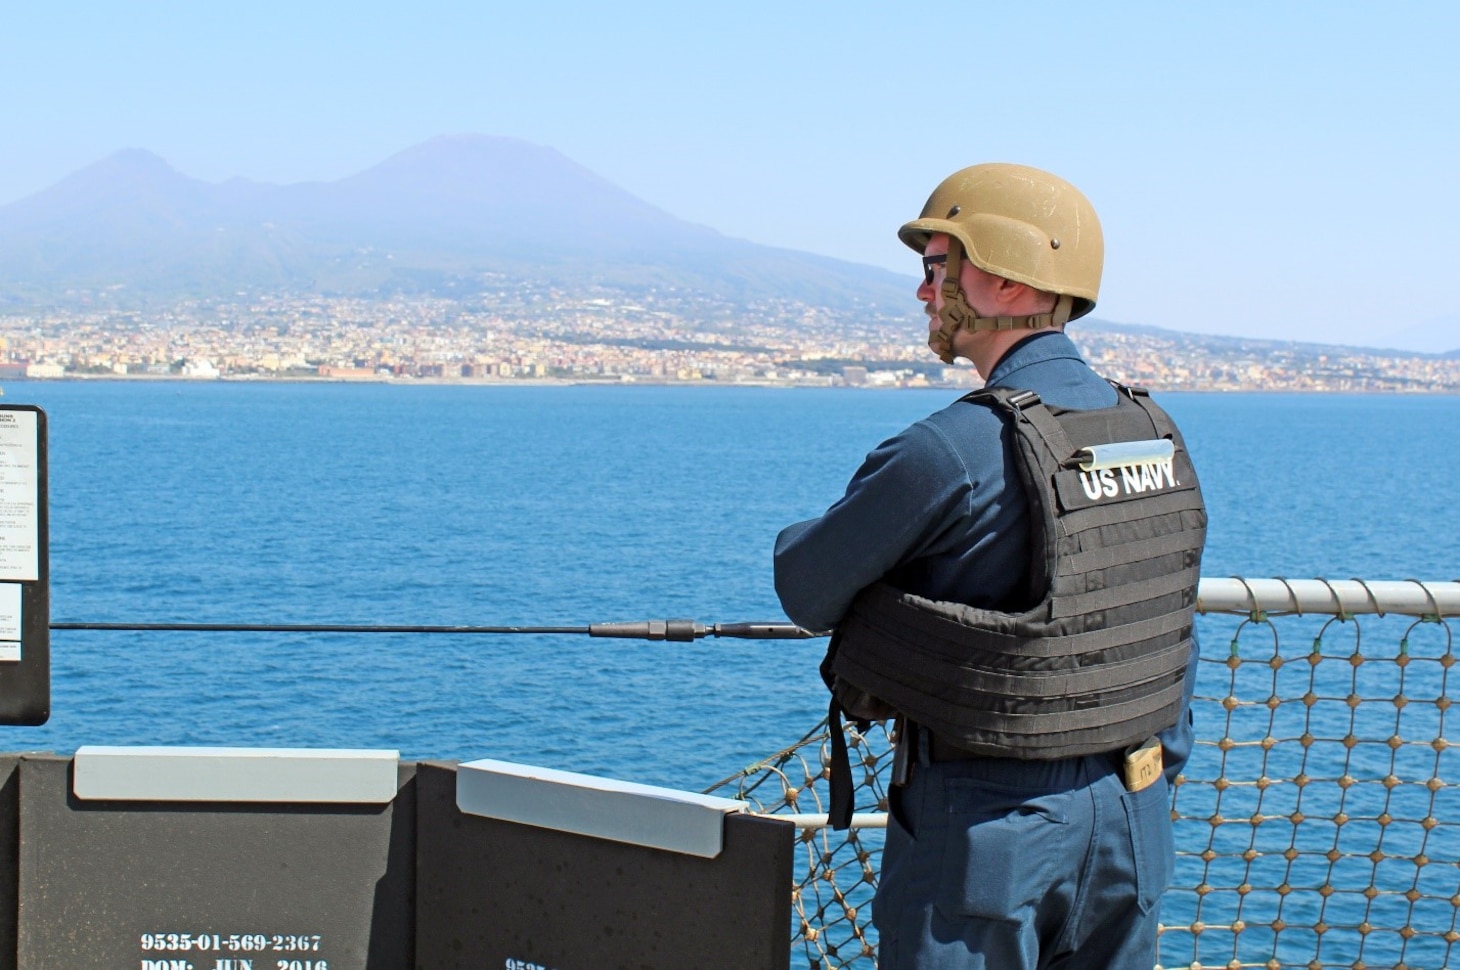 240407-N-JC445-1002 NAPLES, Italy (April 7, 2024) Information Systems Technician 2nd Class Landry Spence, observes sea and anchor detail aboard the Blue Ridge-class command and control ship USS Mount Whitney (LCC 20) as it arrives in Naples, Italy. Mount Whitney, the U.S. Sixth Fleet flagship, is on a scheduled port visit to participate in the 75th anniversary of the NATO Alliance and enhance U.S.-Italian relations. Homeported in Gaeta, Mount Whitney operates with a combined crew of U.S. Sailors and Military Sealift Command civil service members. (U.S. Navy photo by Mass Communication Specialist 2nd Class Mario Coto)